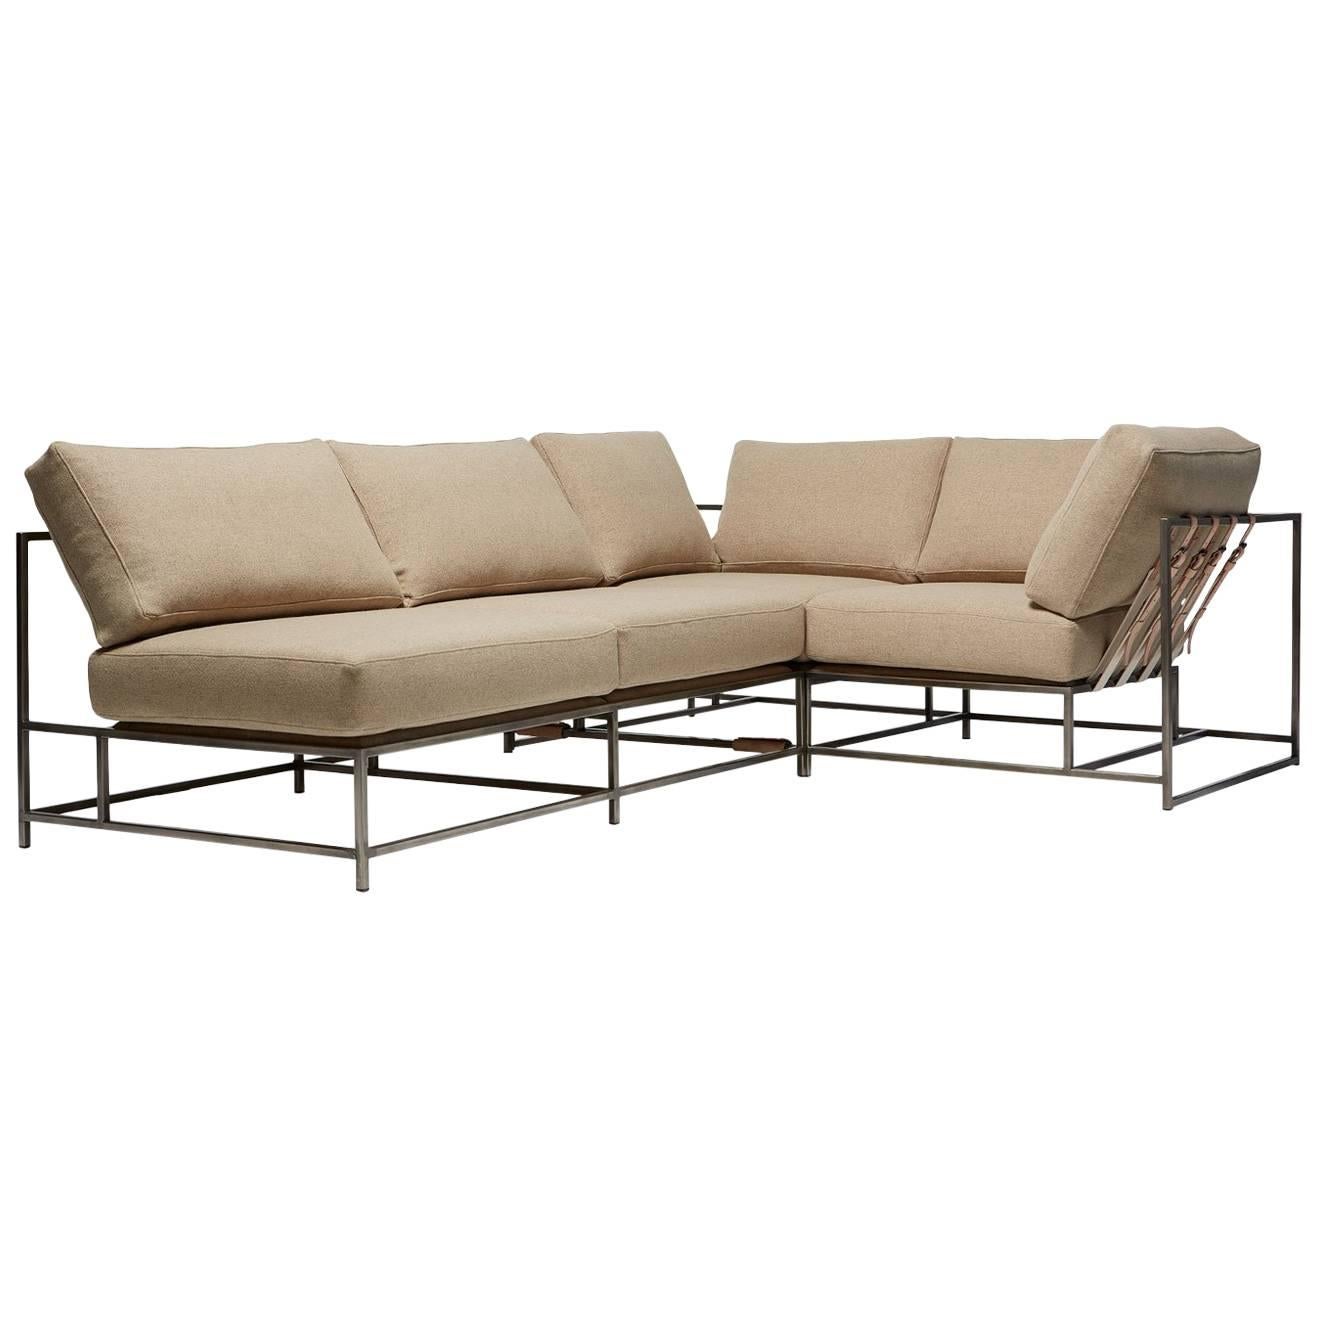 Tan Wool & Antique Nickel Small Sectional